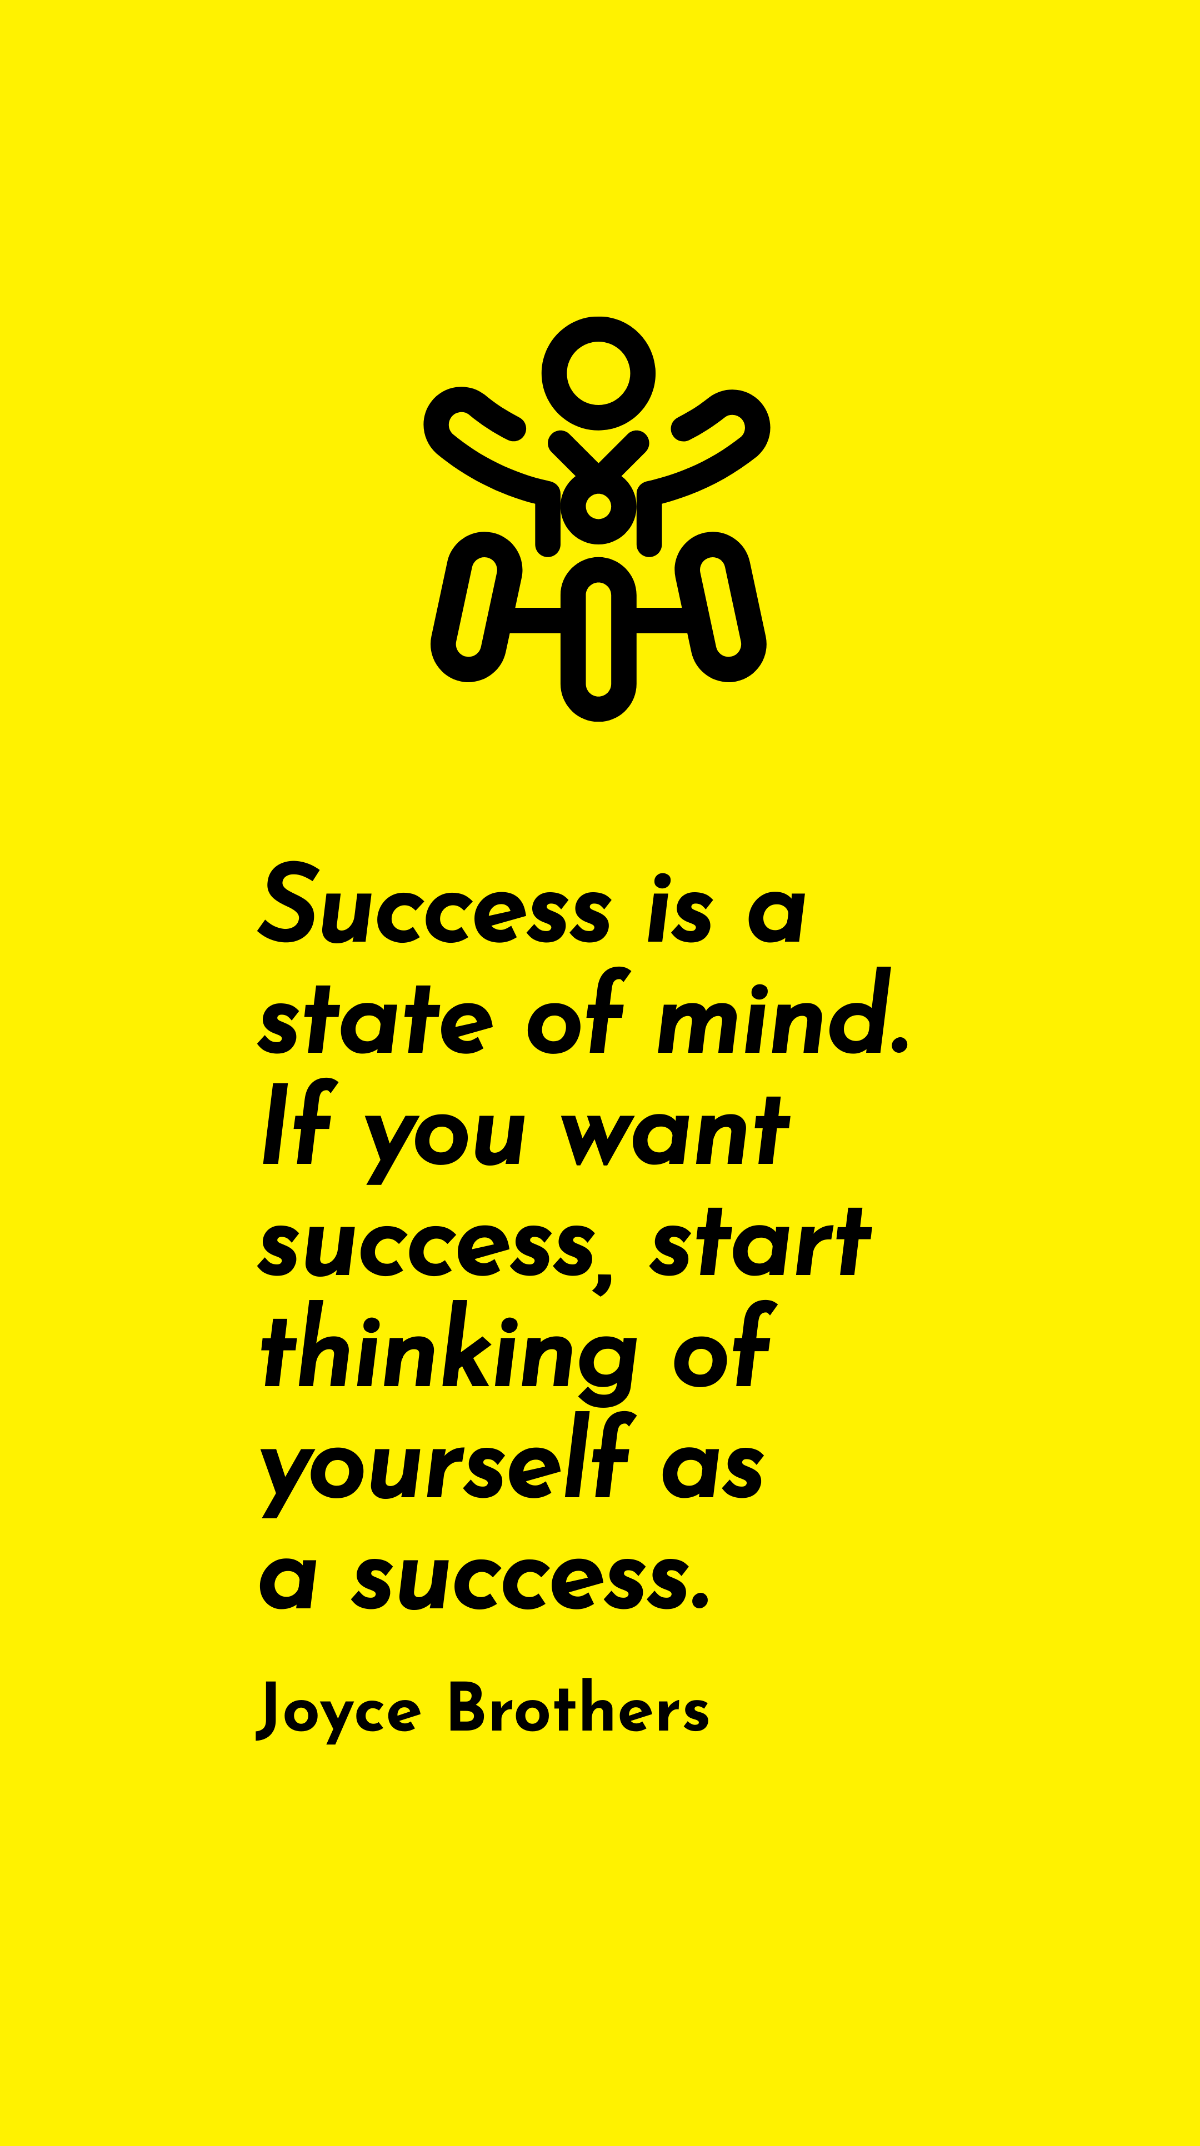 Free Joyce Brothers - Success is a state of mind. If you want success, start thinking of yourself as a success. Template